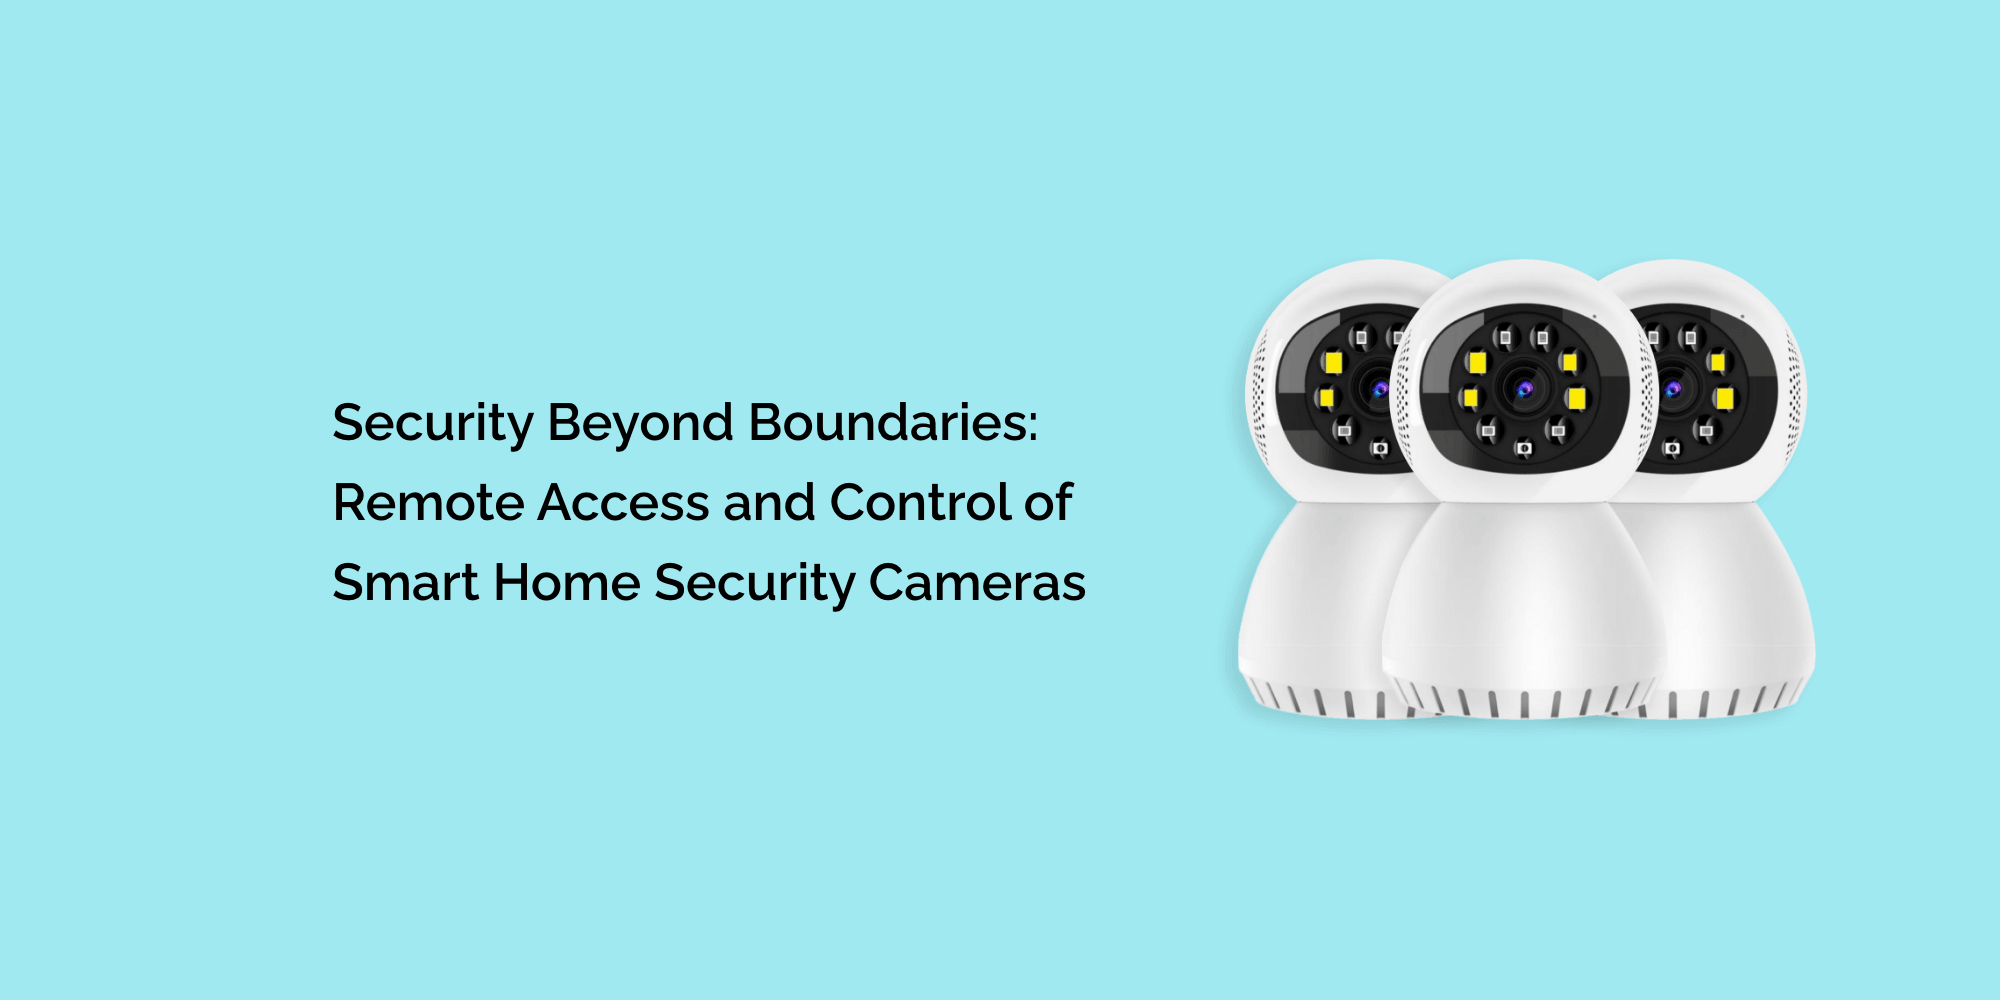 Security Beyond Boundaries: Remote Access and Control of Smart Home Security Cameras